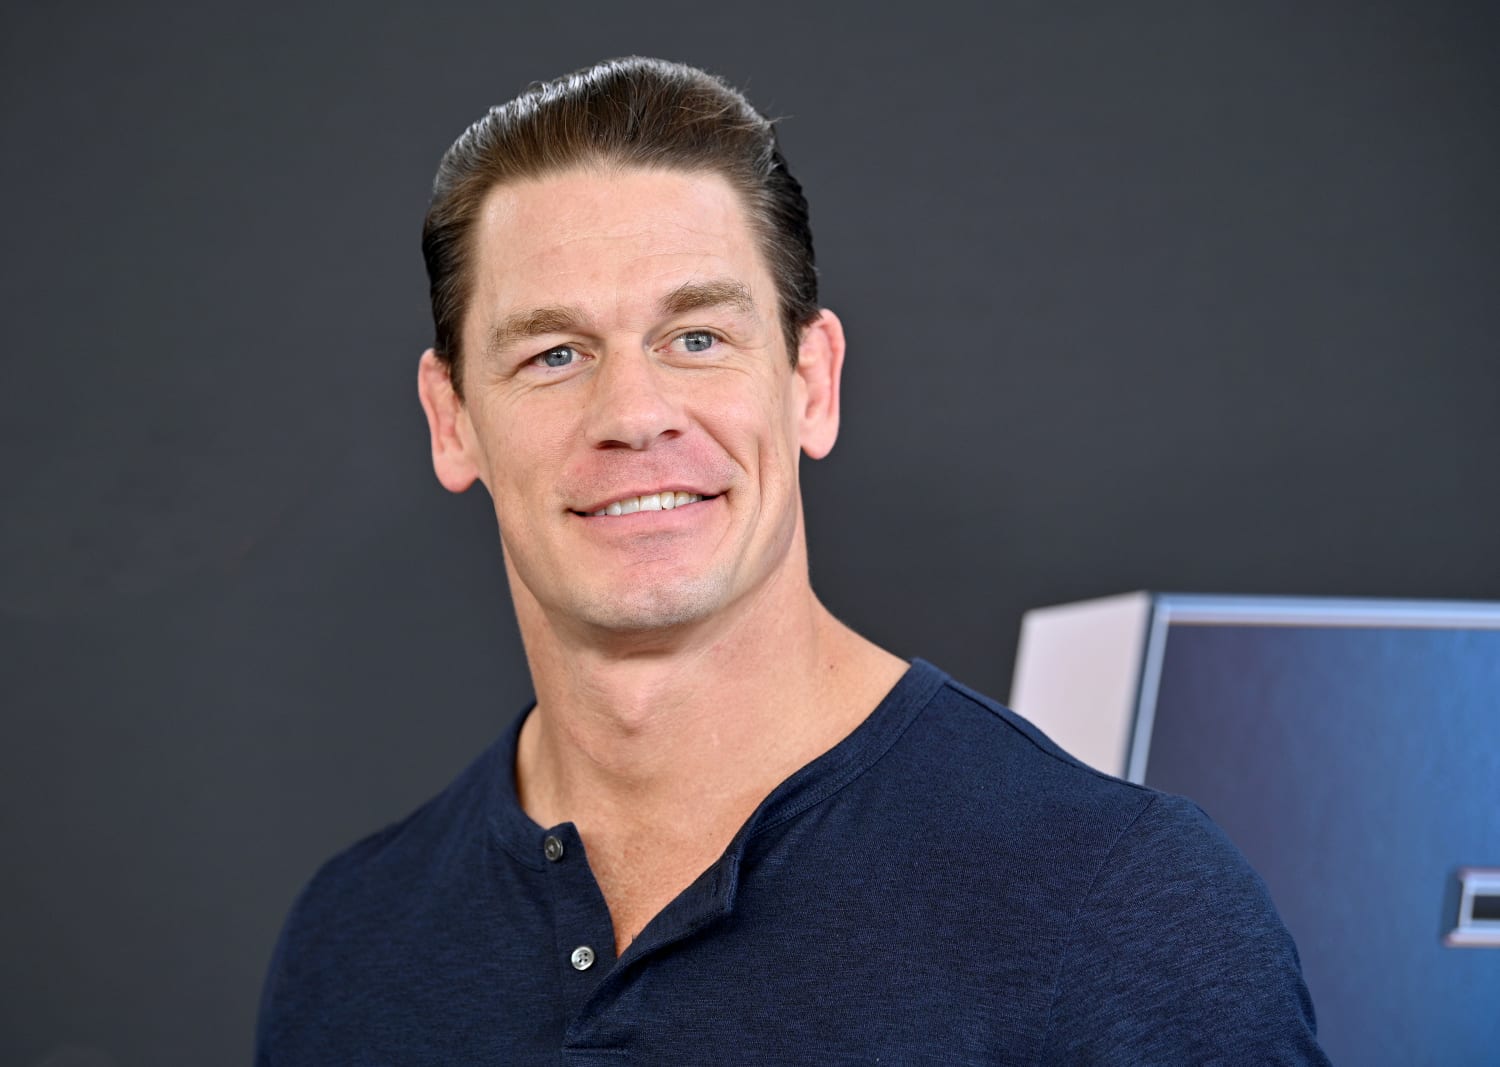 John Cena sets new Guinness World Record after granting 650 wishes